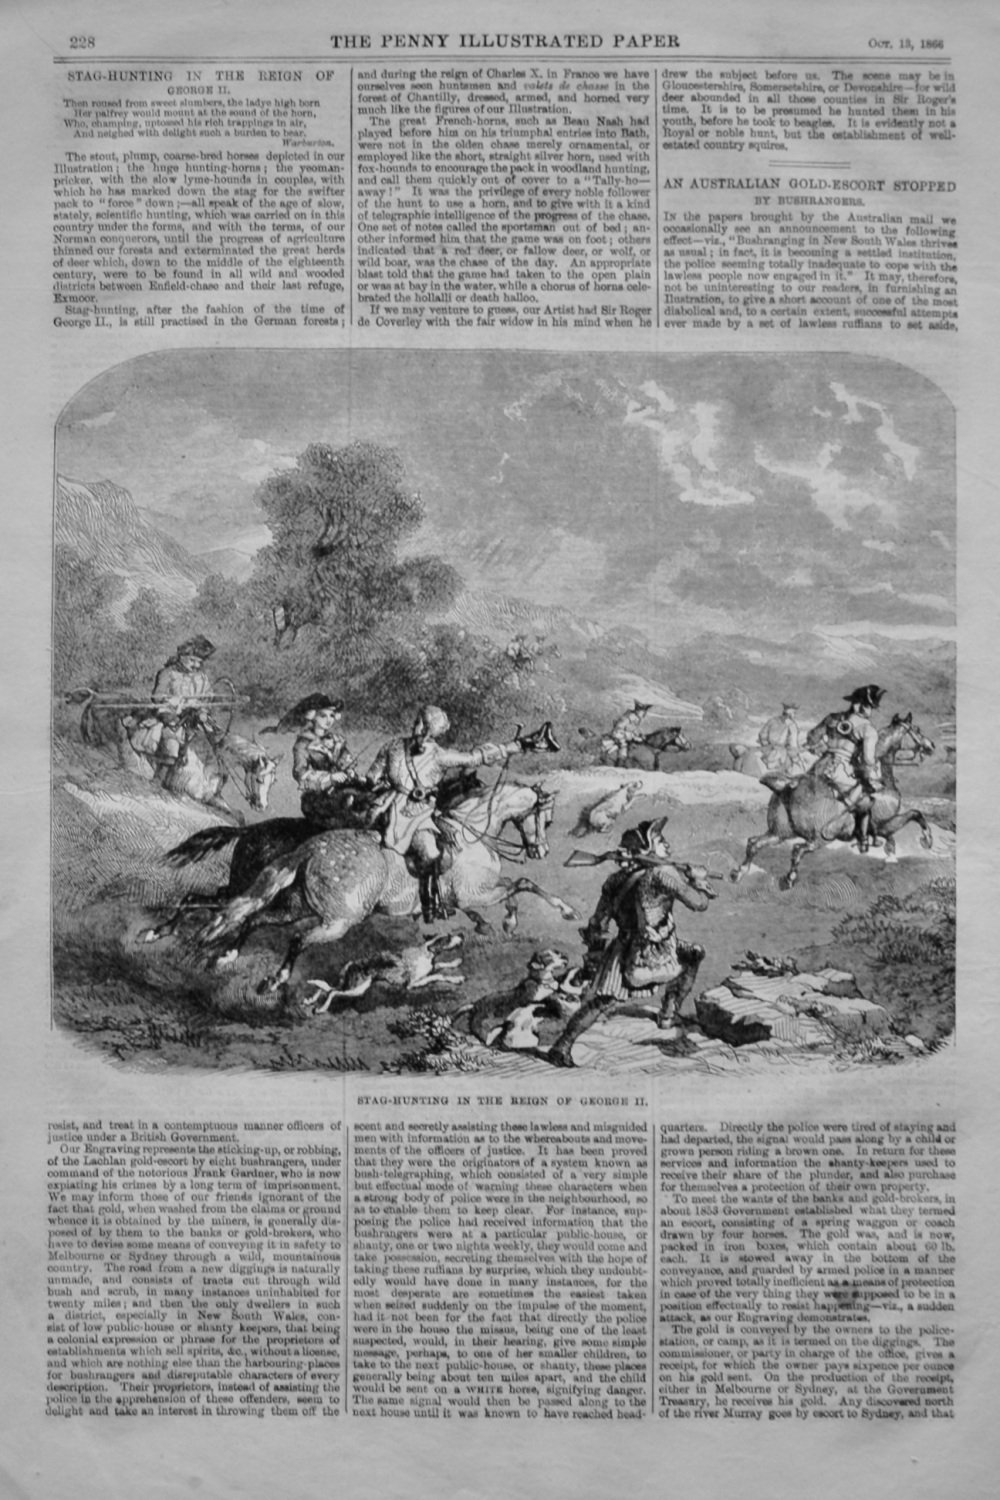 Stag-Hunting in the Reign of George II.  1866.